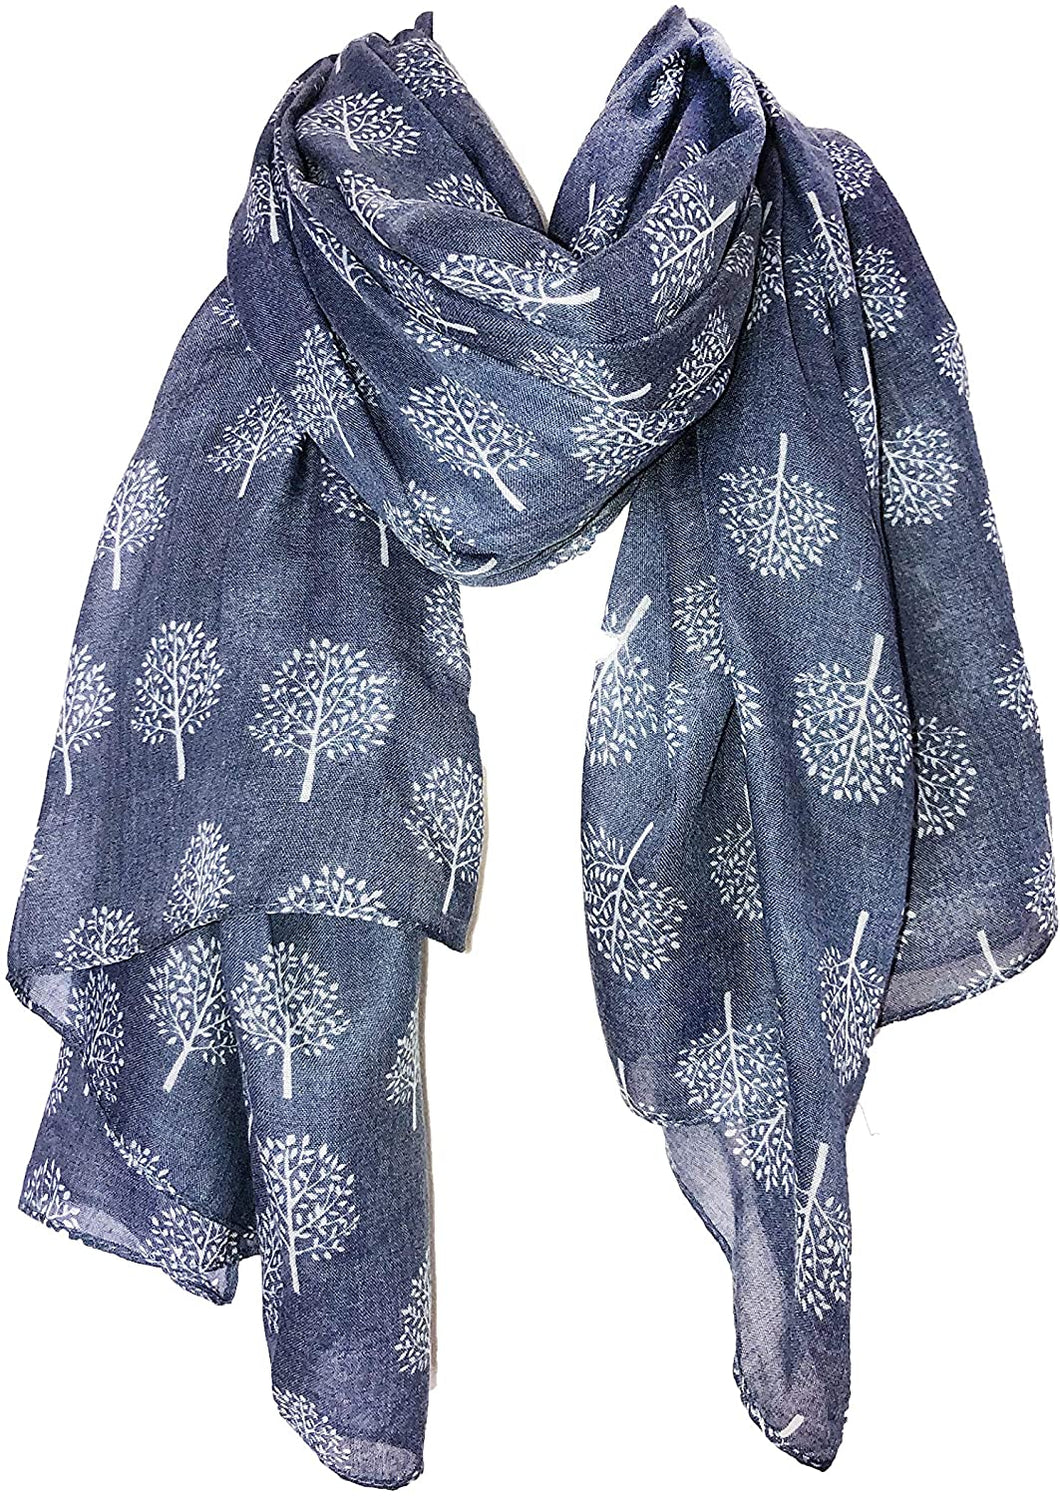 Blue Scarf with a White Mulberry Tree Style Print Ladies Trees Wrap Denim Blue Colour Shawl